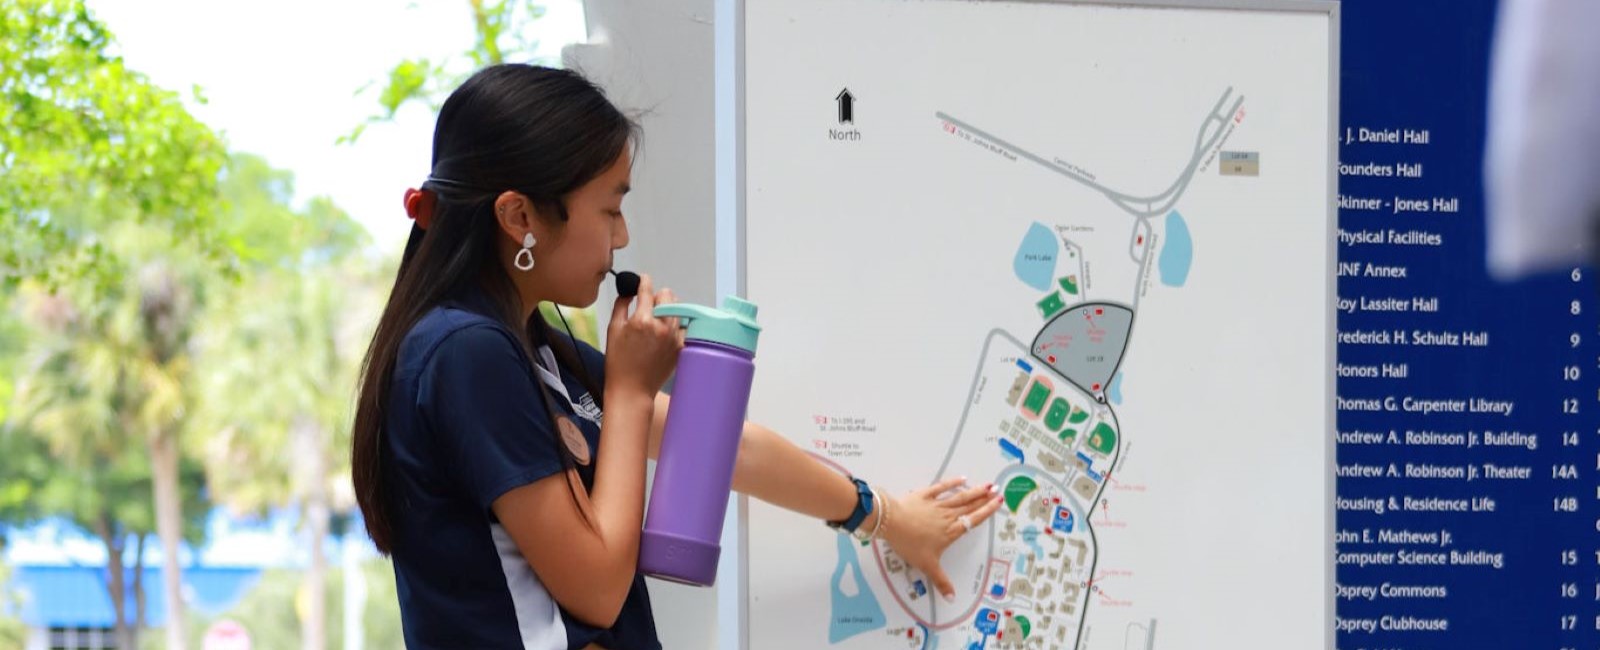 A UNF student tour guide gesturing towards a campus map